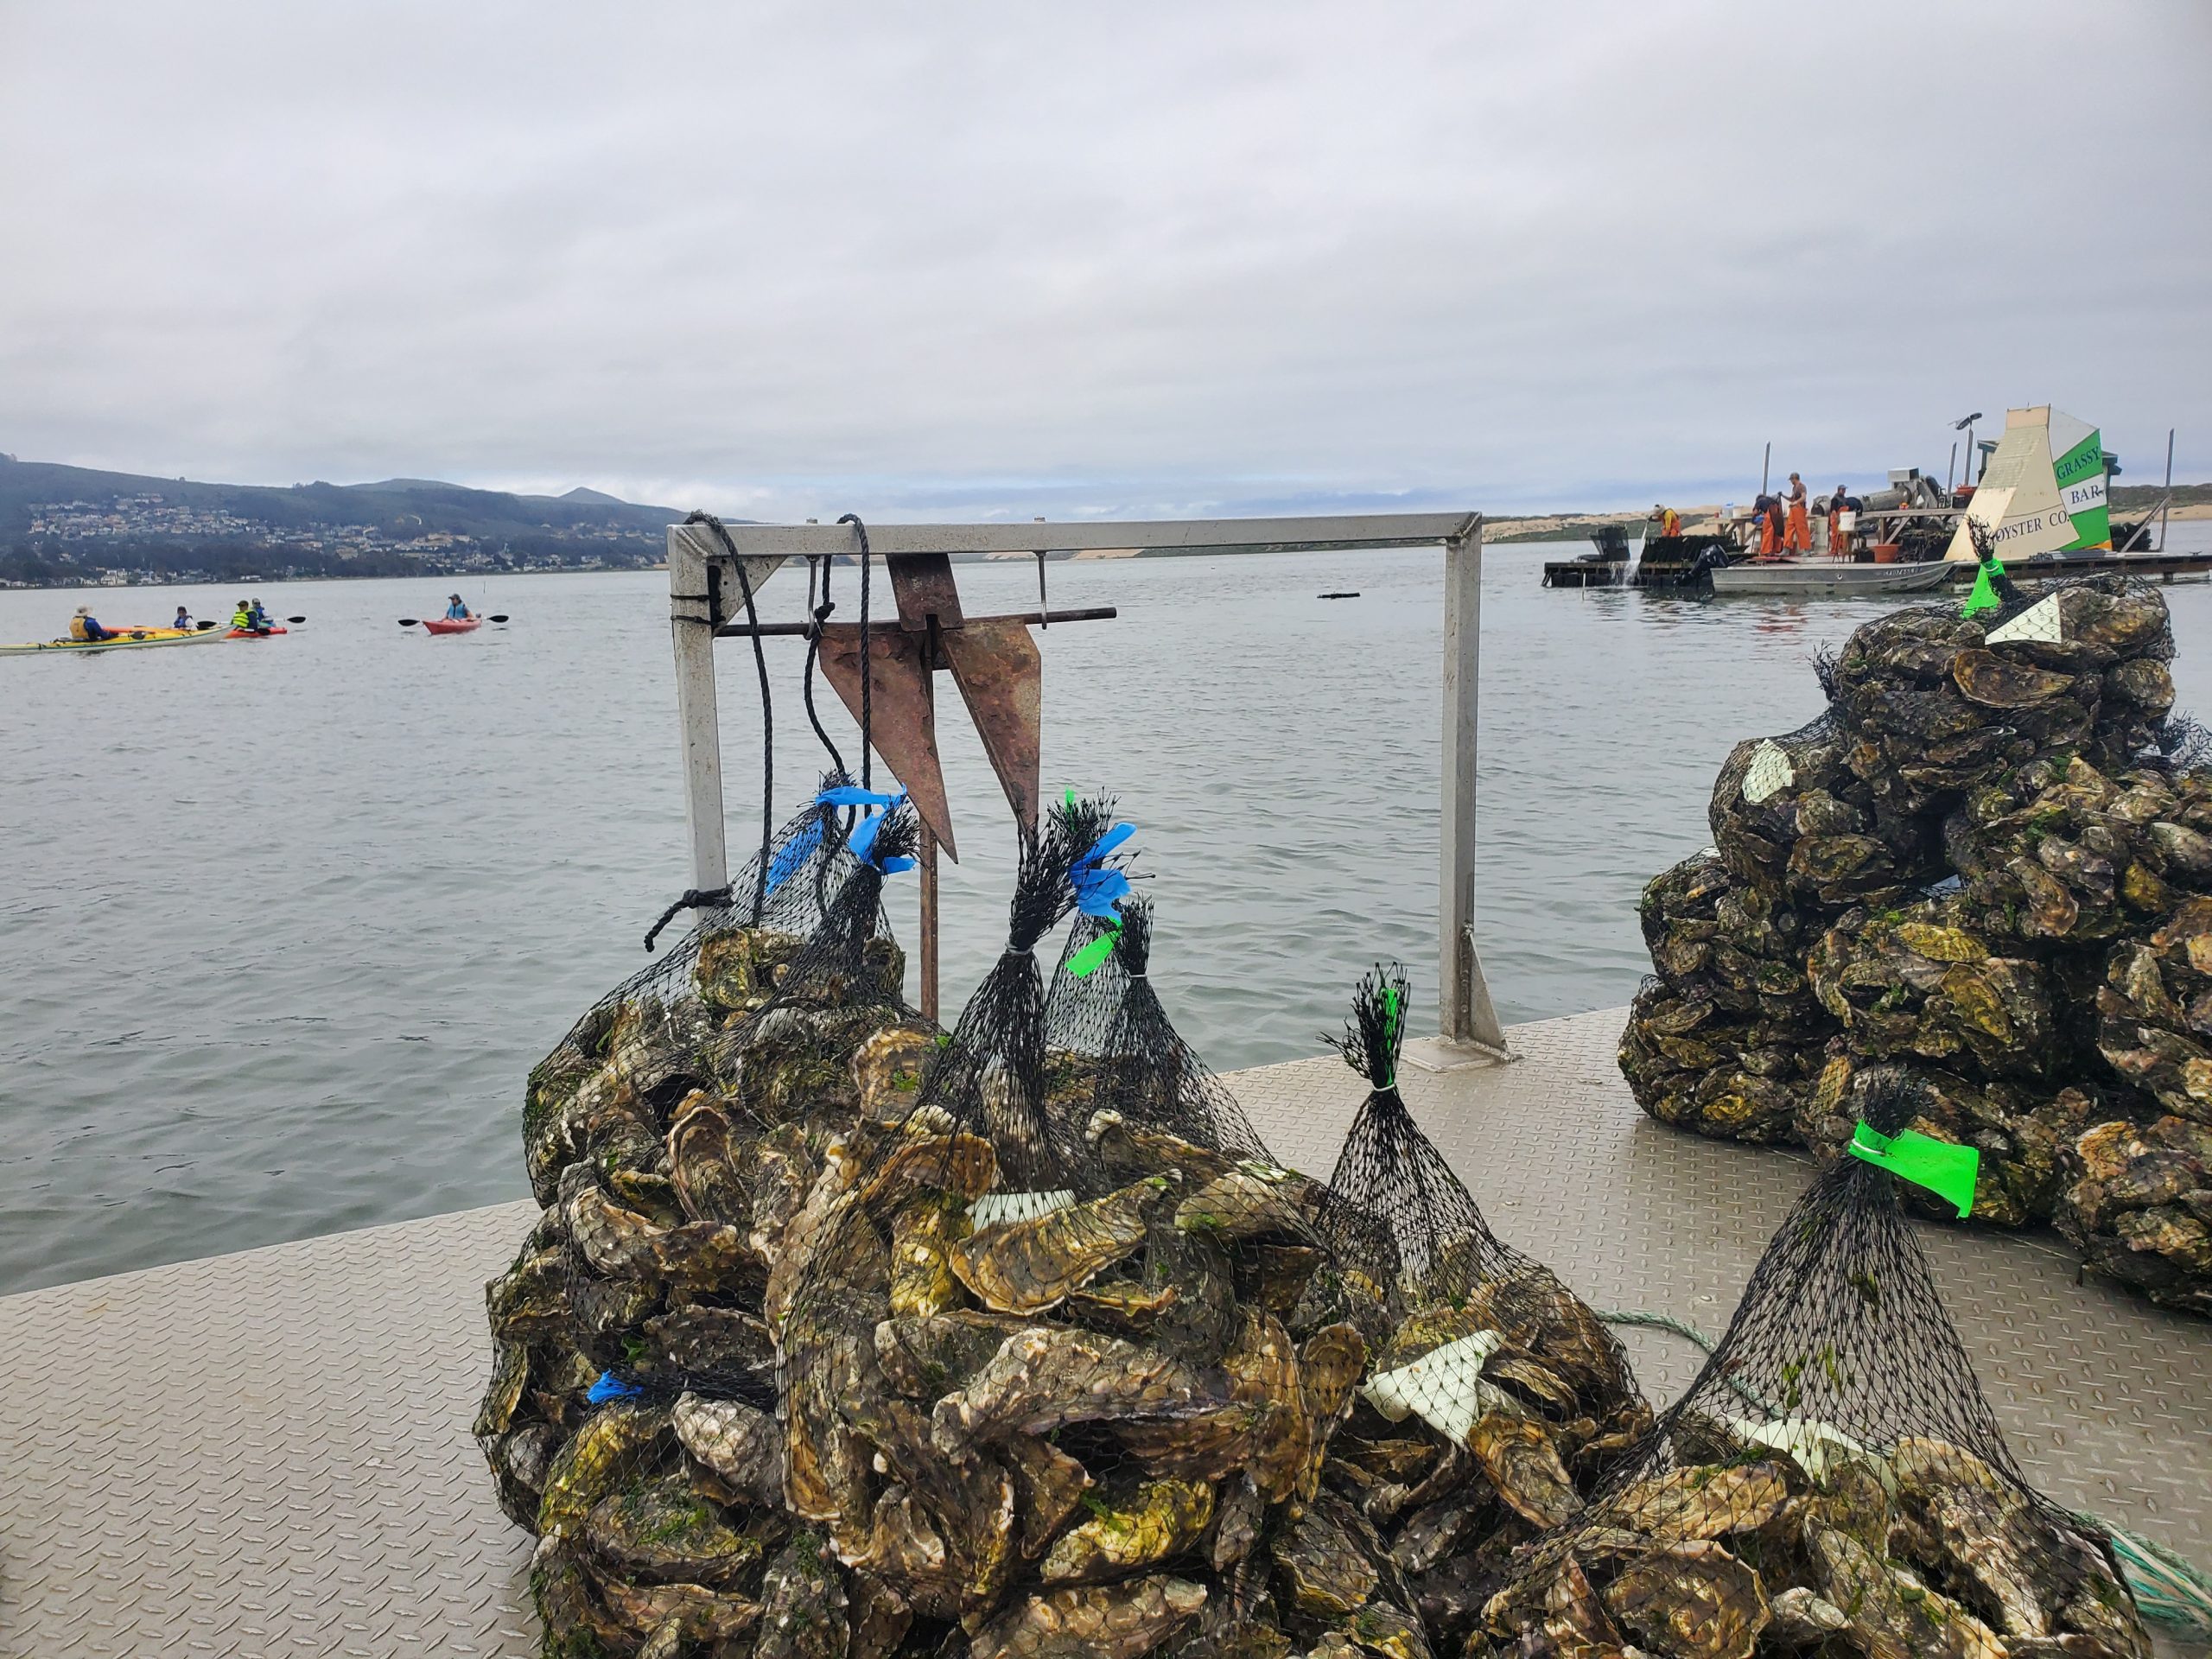 Is the bay clean enough to support commercial shellfish farming?